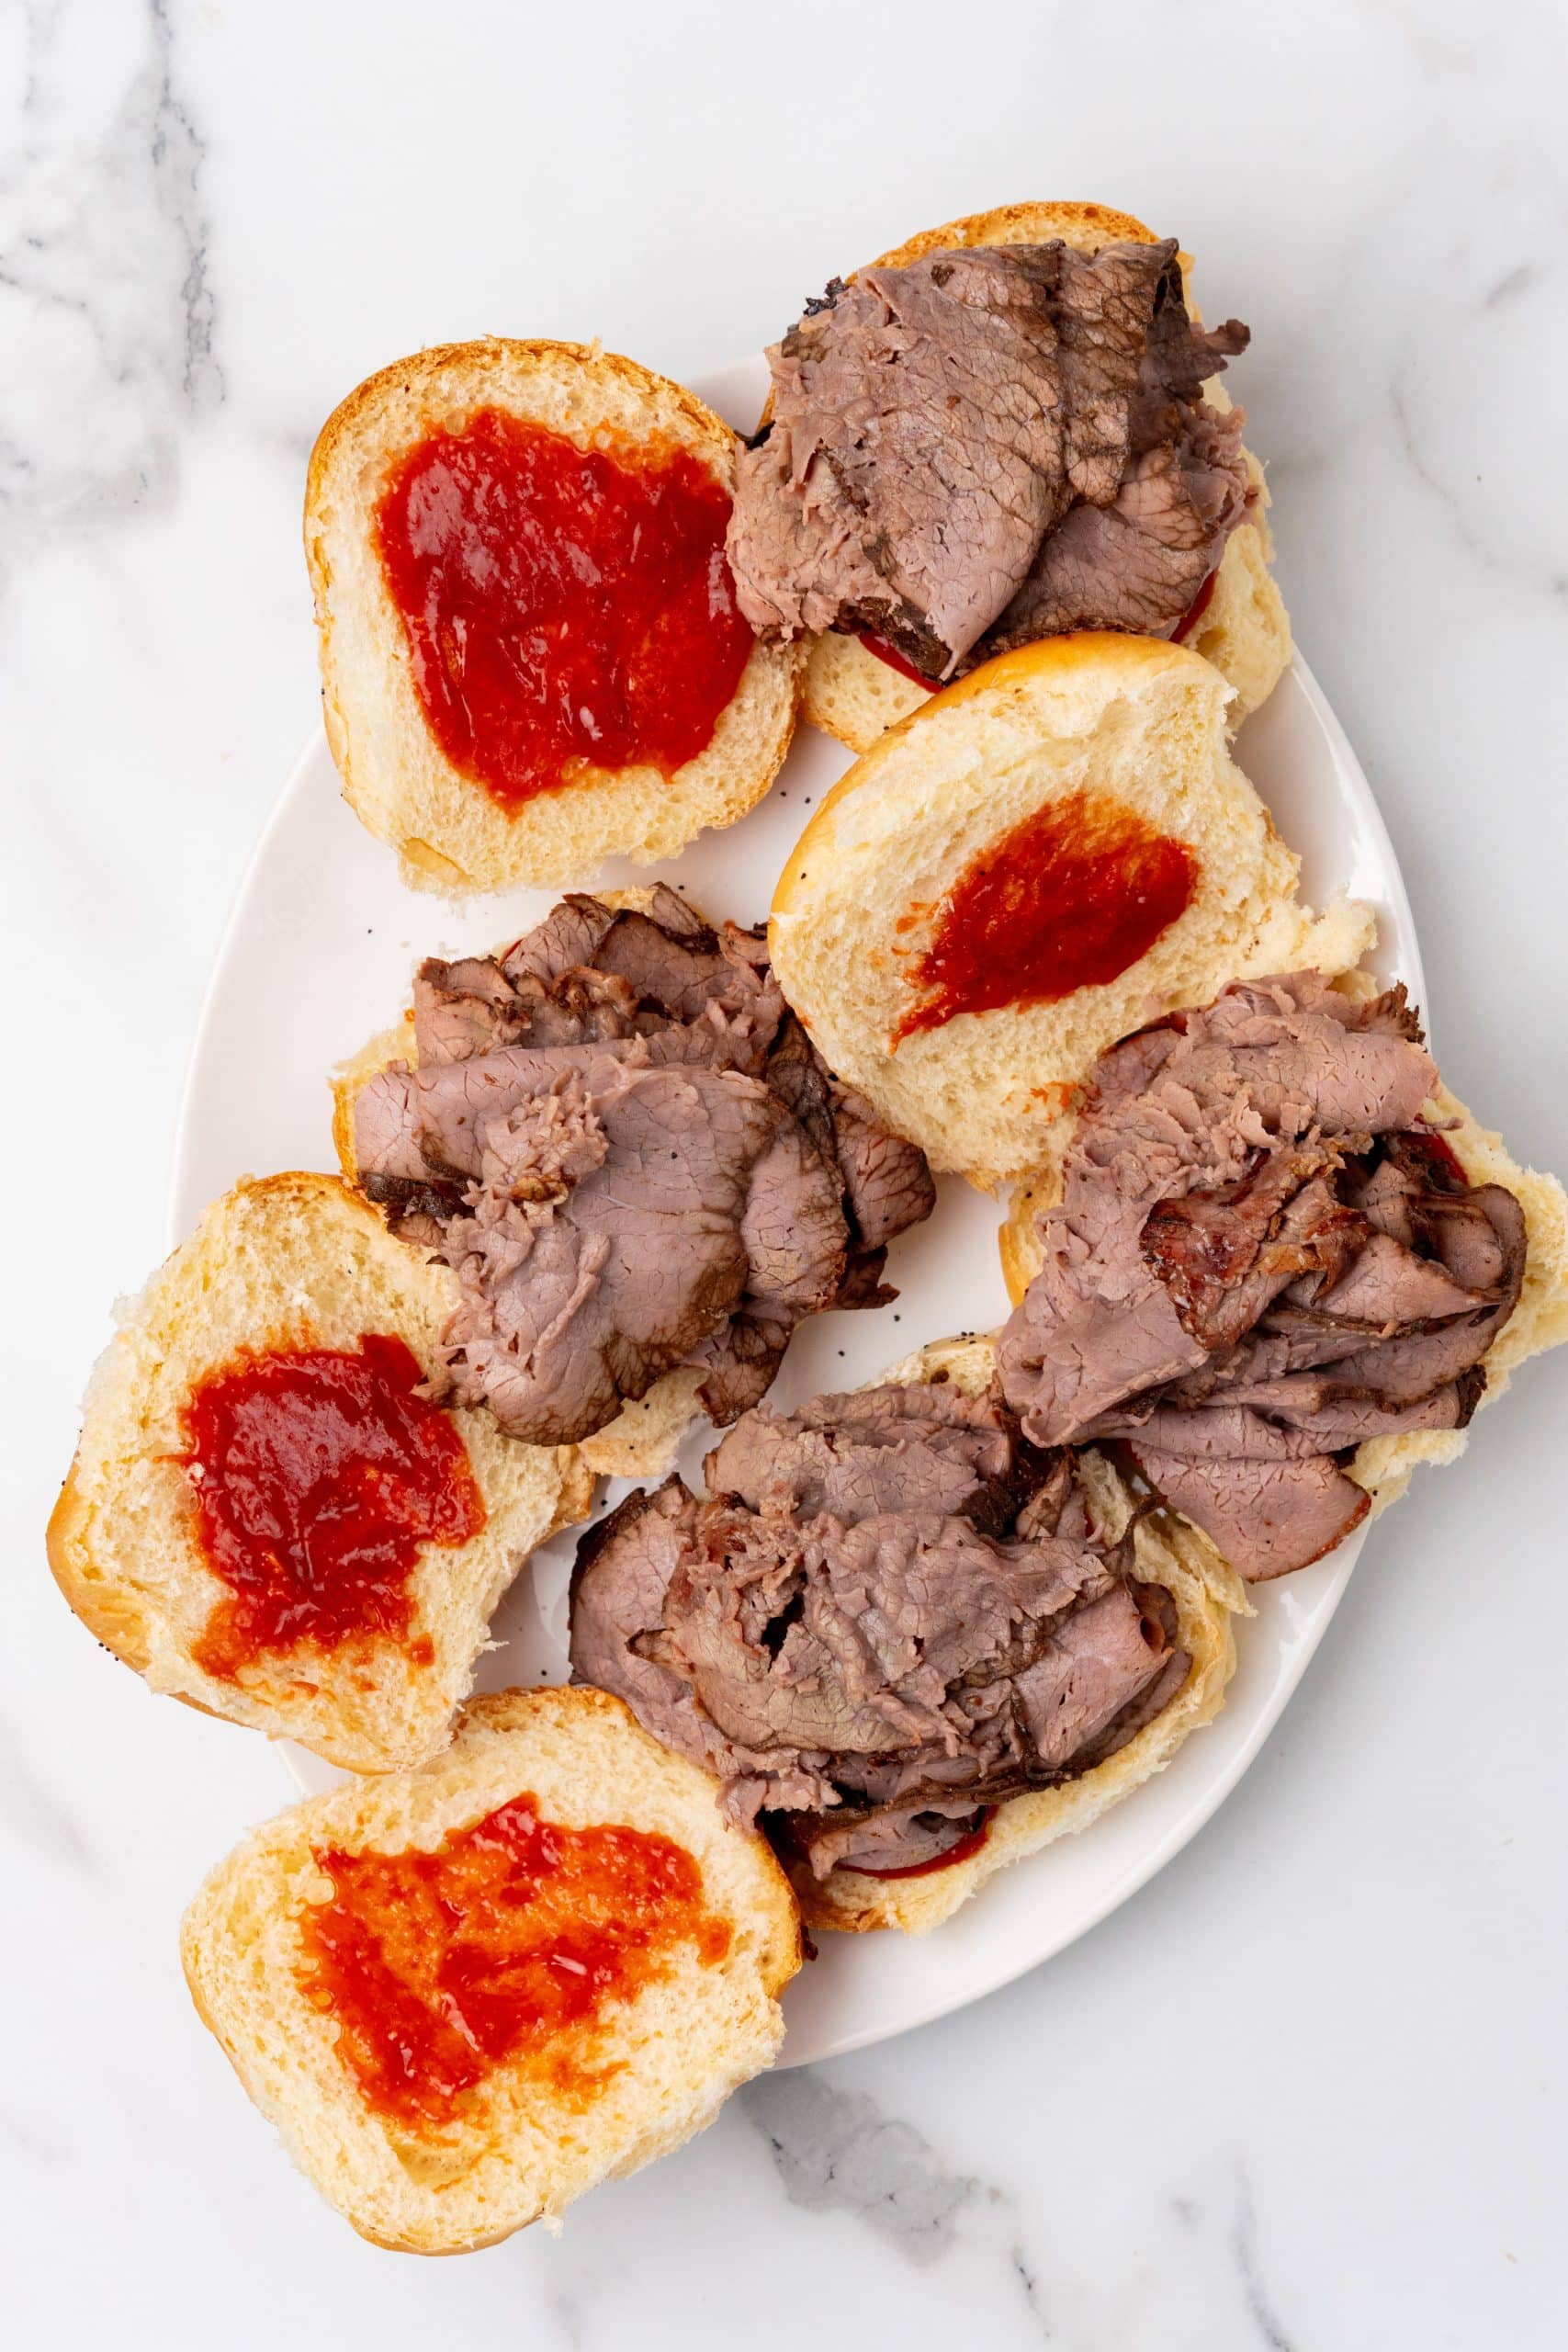 homemade arby's roast beef sandwiches on a white serving platter